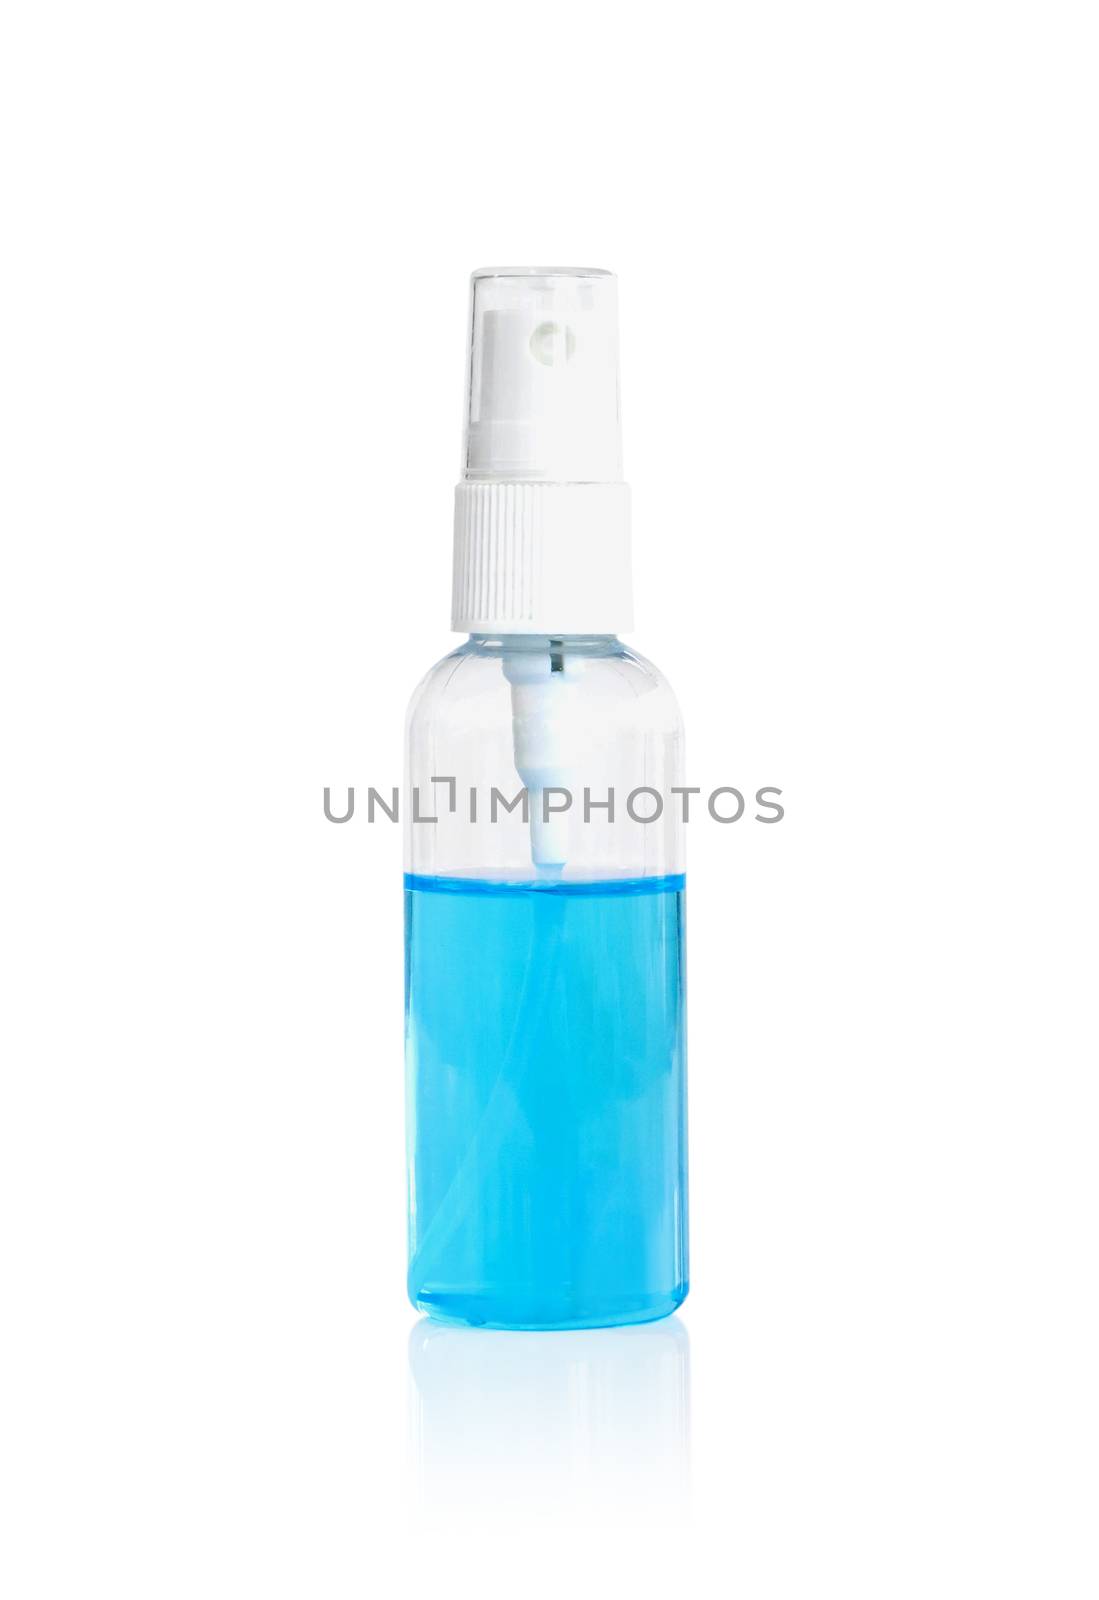 Alcohol in plastic bottle spray isolated on white background for washing hand, health care and medical concept